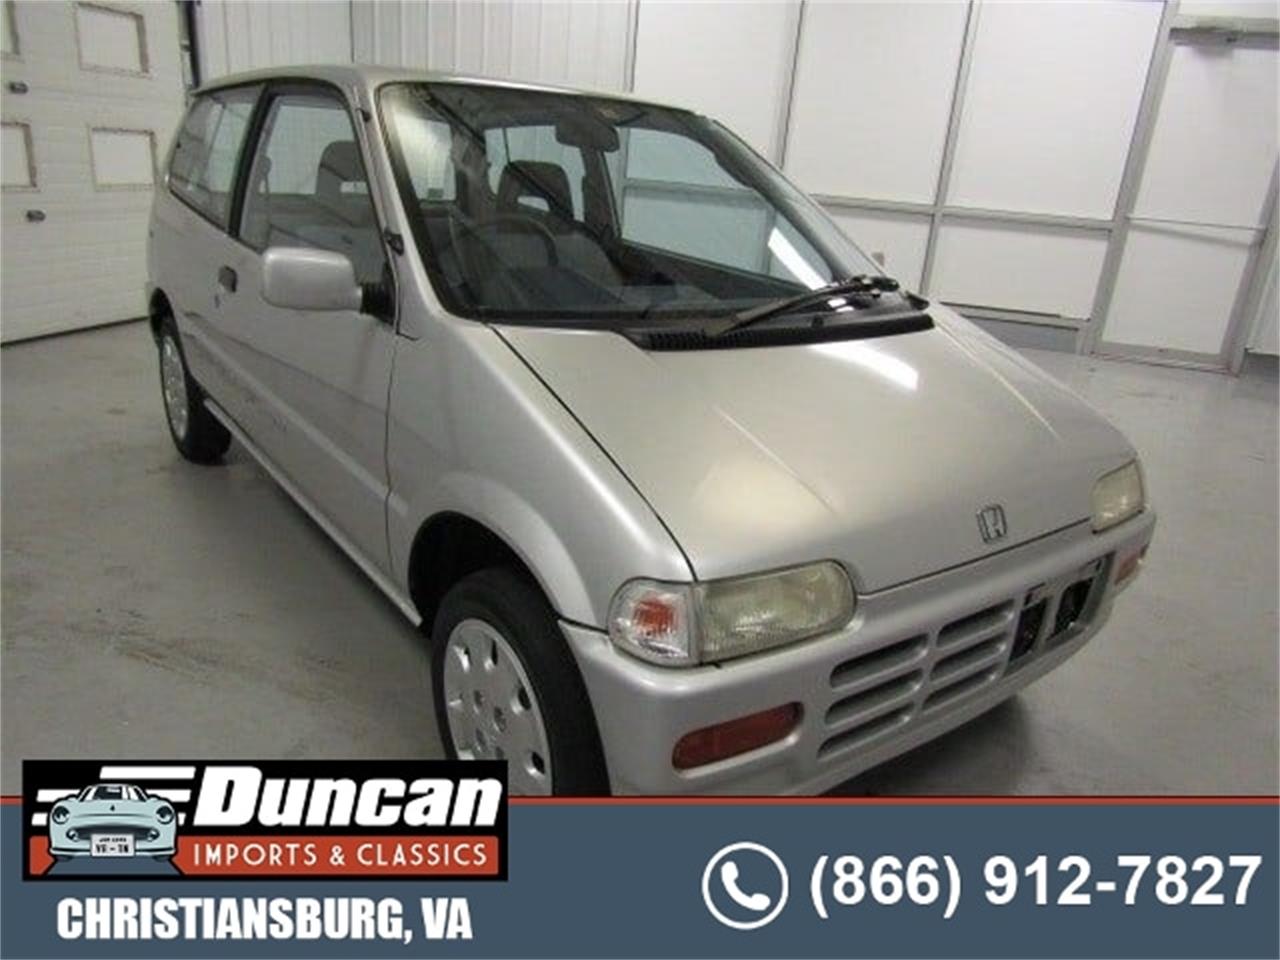 For Sale: 1988 Honda Today in Christiansburg, Virginia for sale in Christiansburg, VA